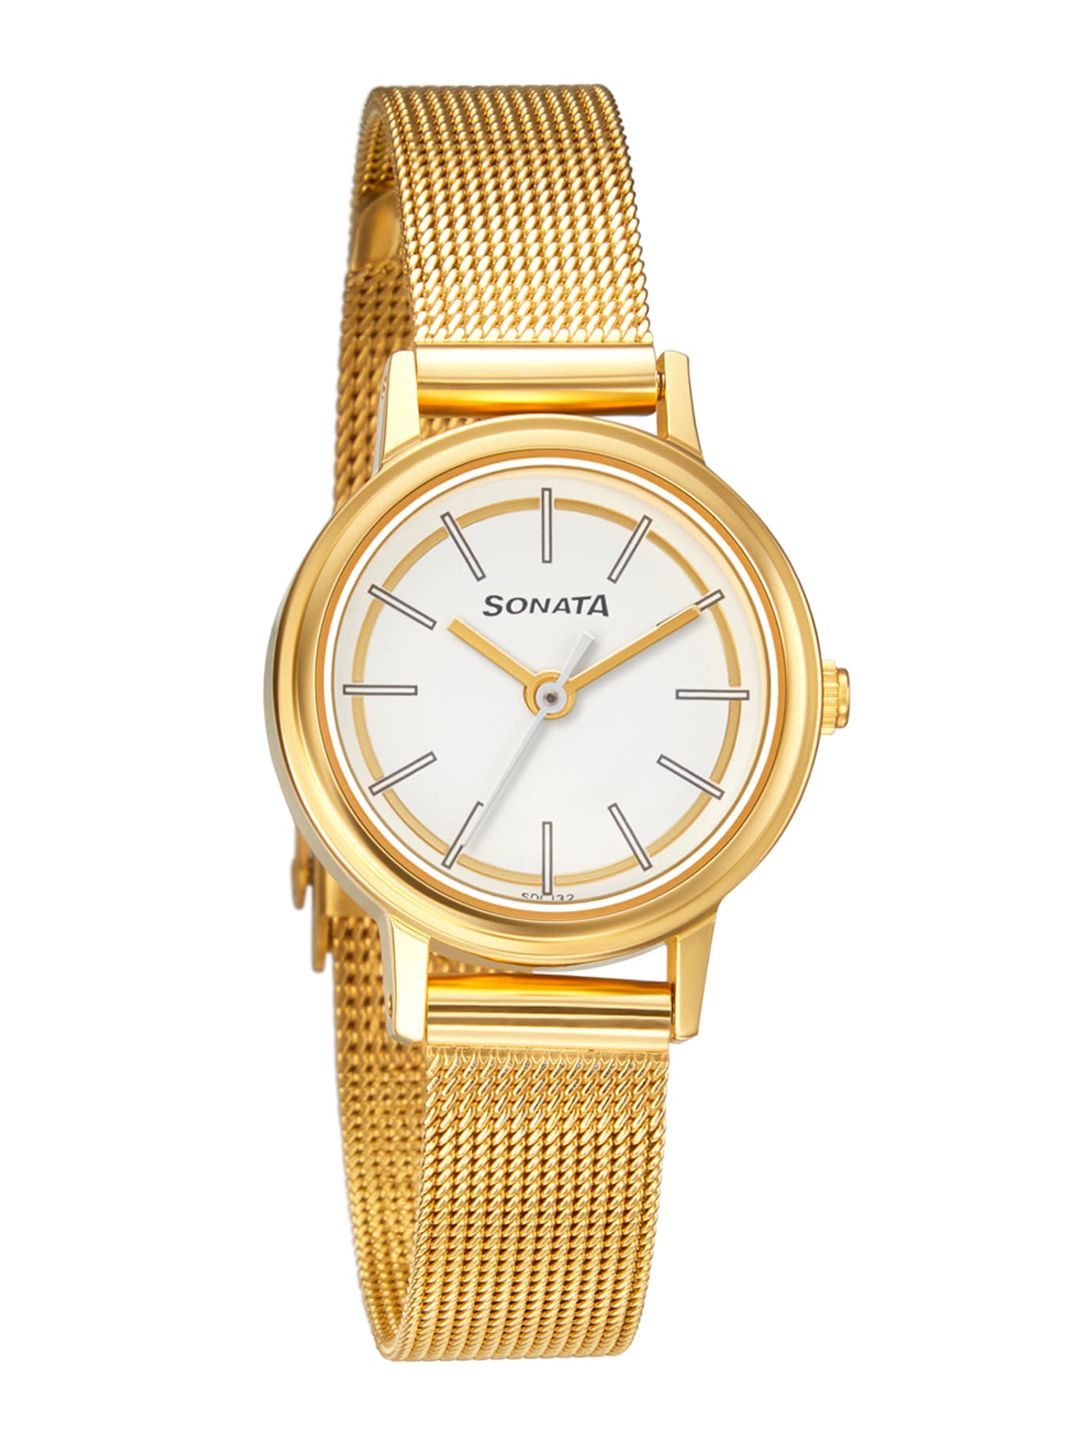 Sonata Women White & Gold-Toned Analogue Watch 8096YM09 Price in India